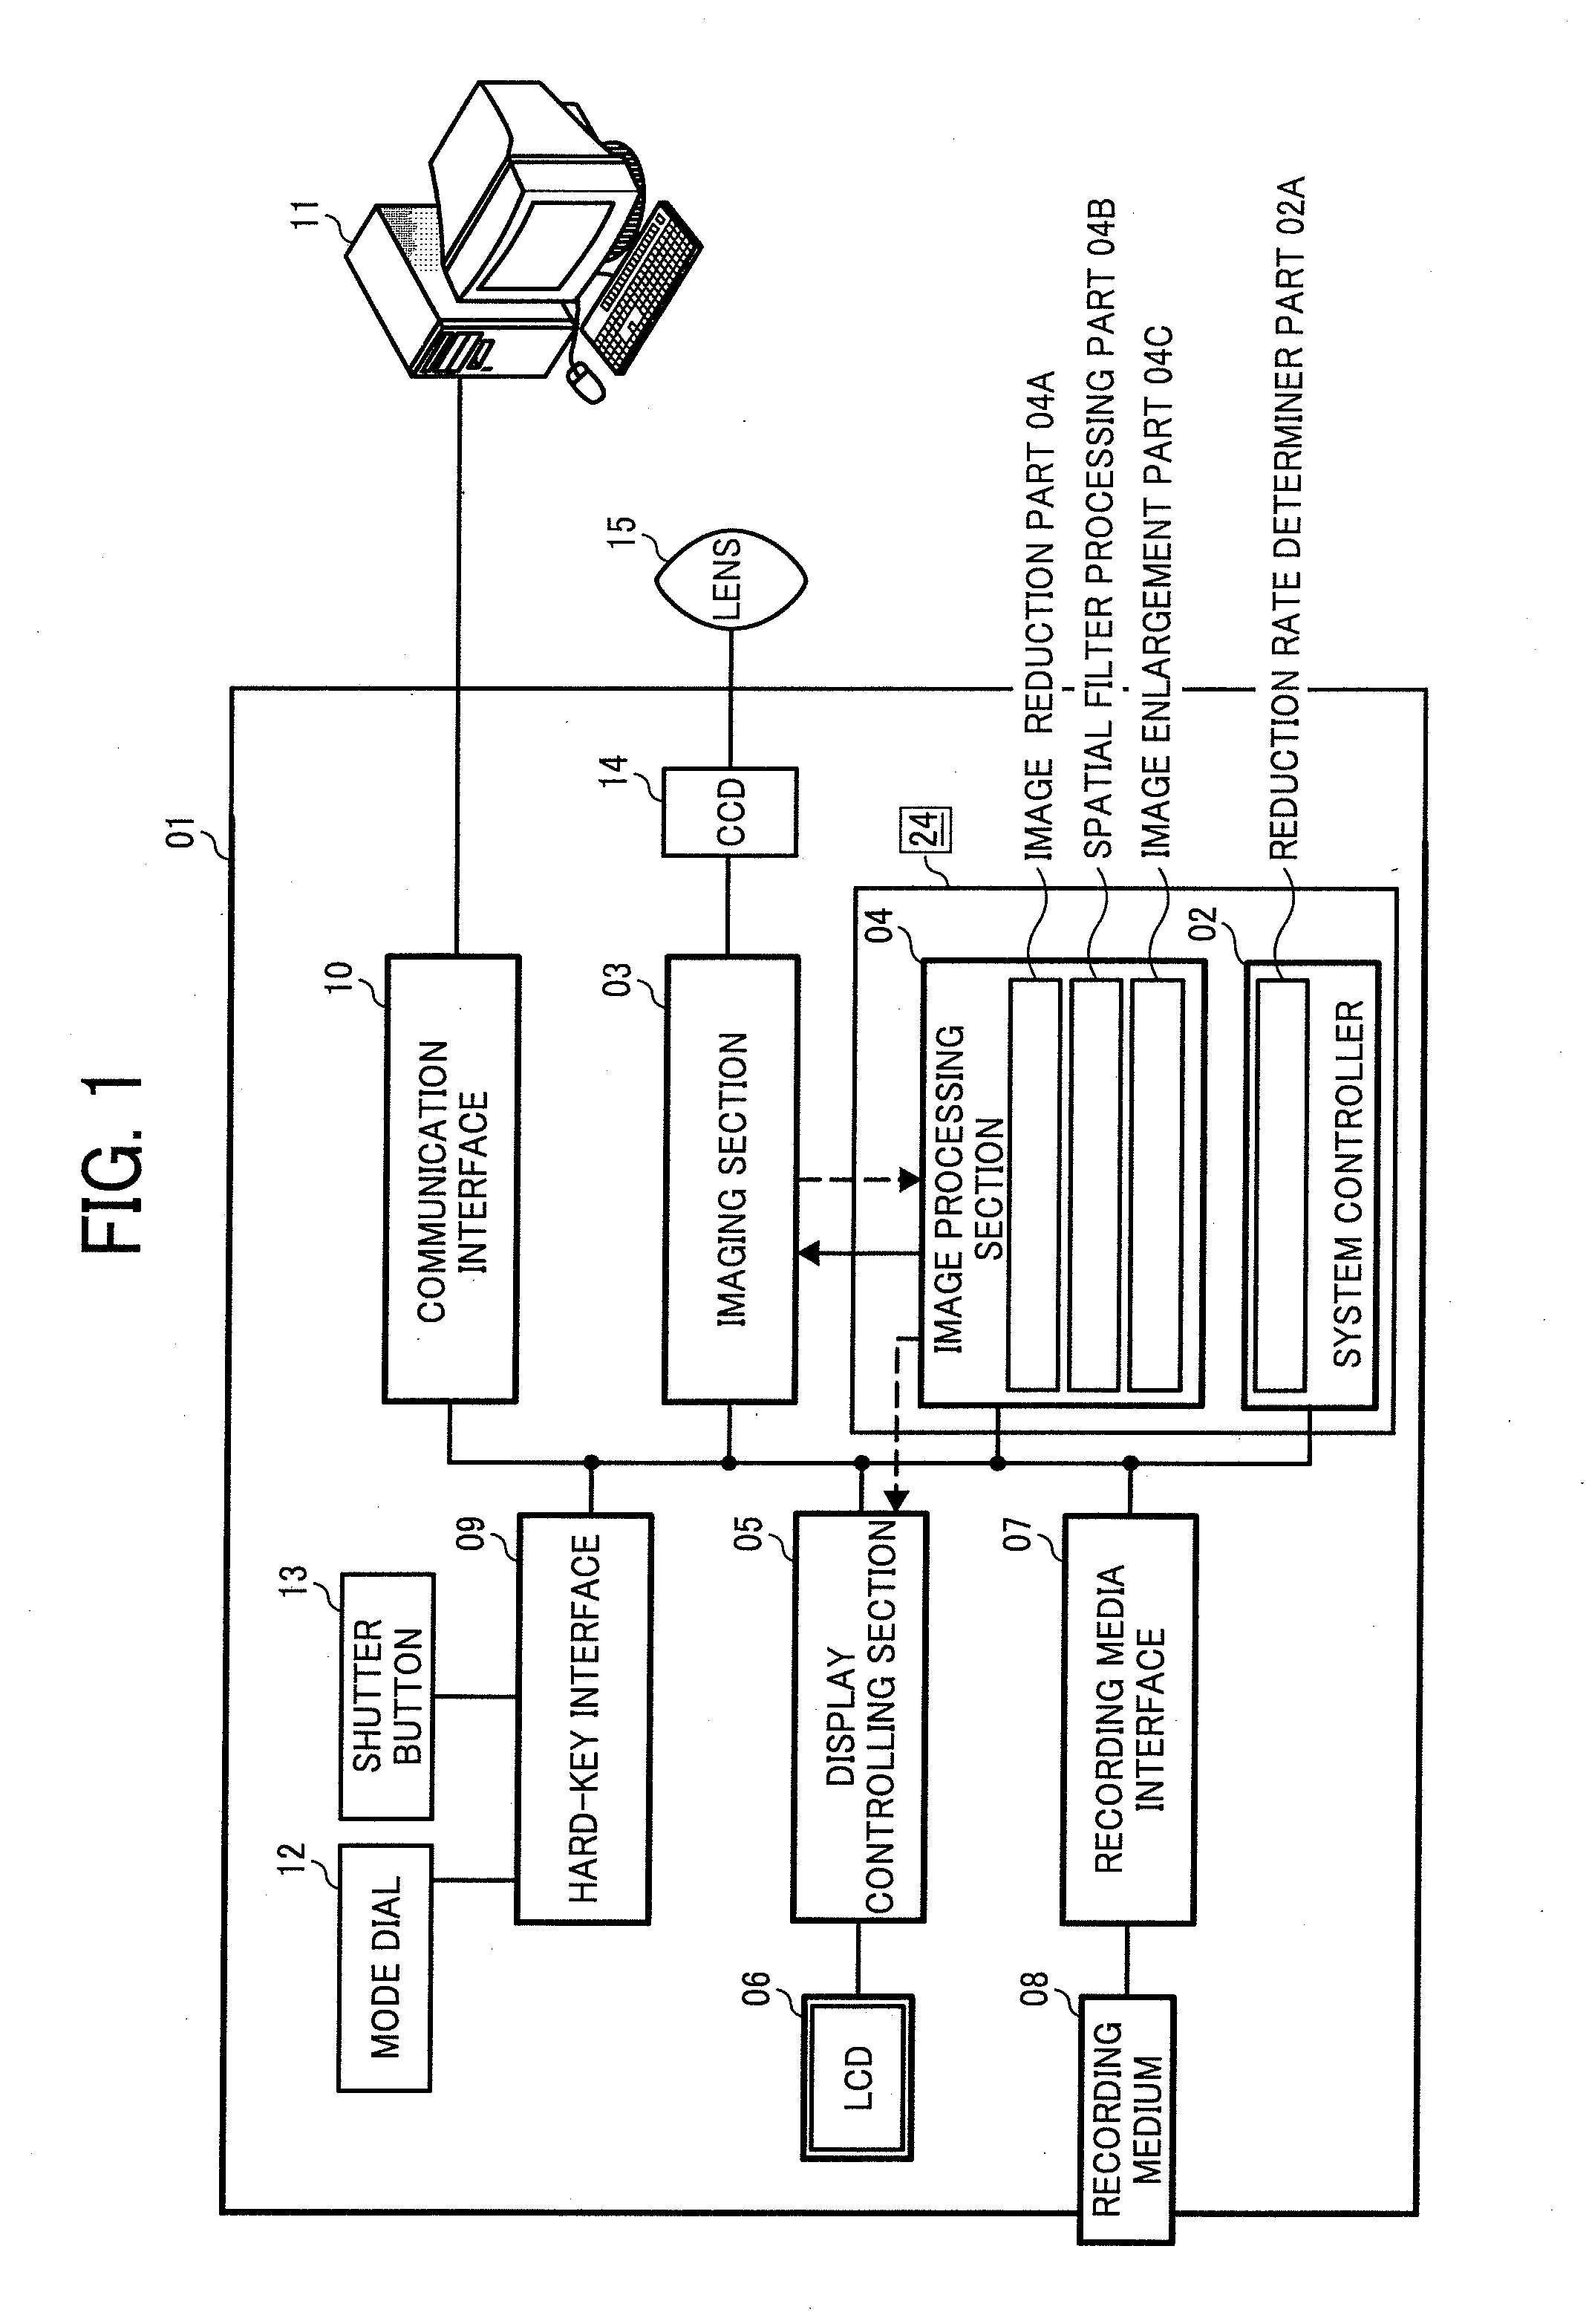 Image processor, imaging apparatus including the same, and image processing method